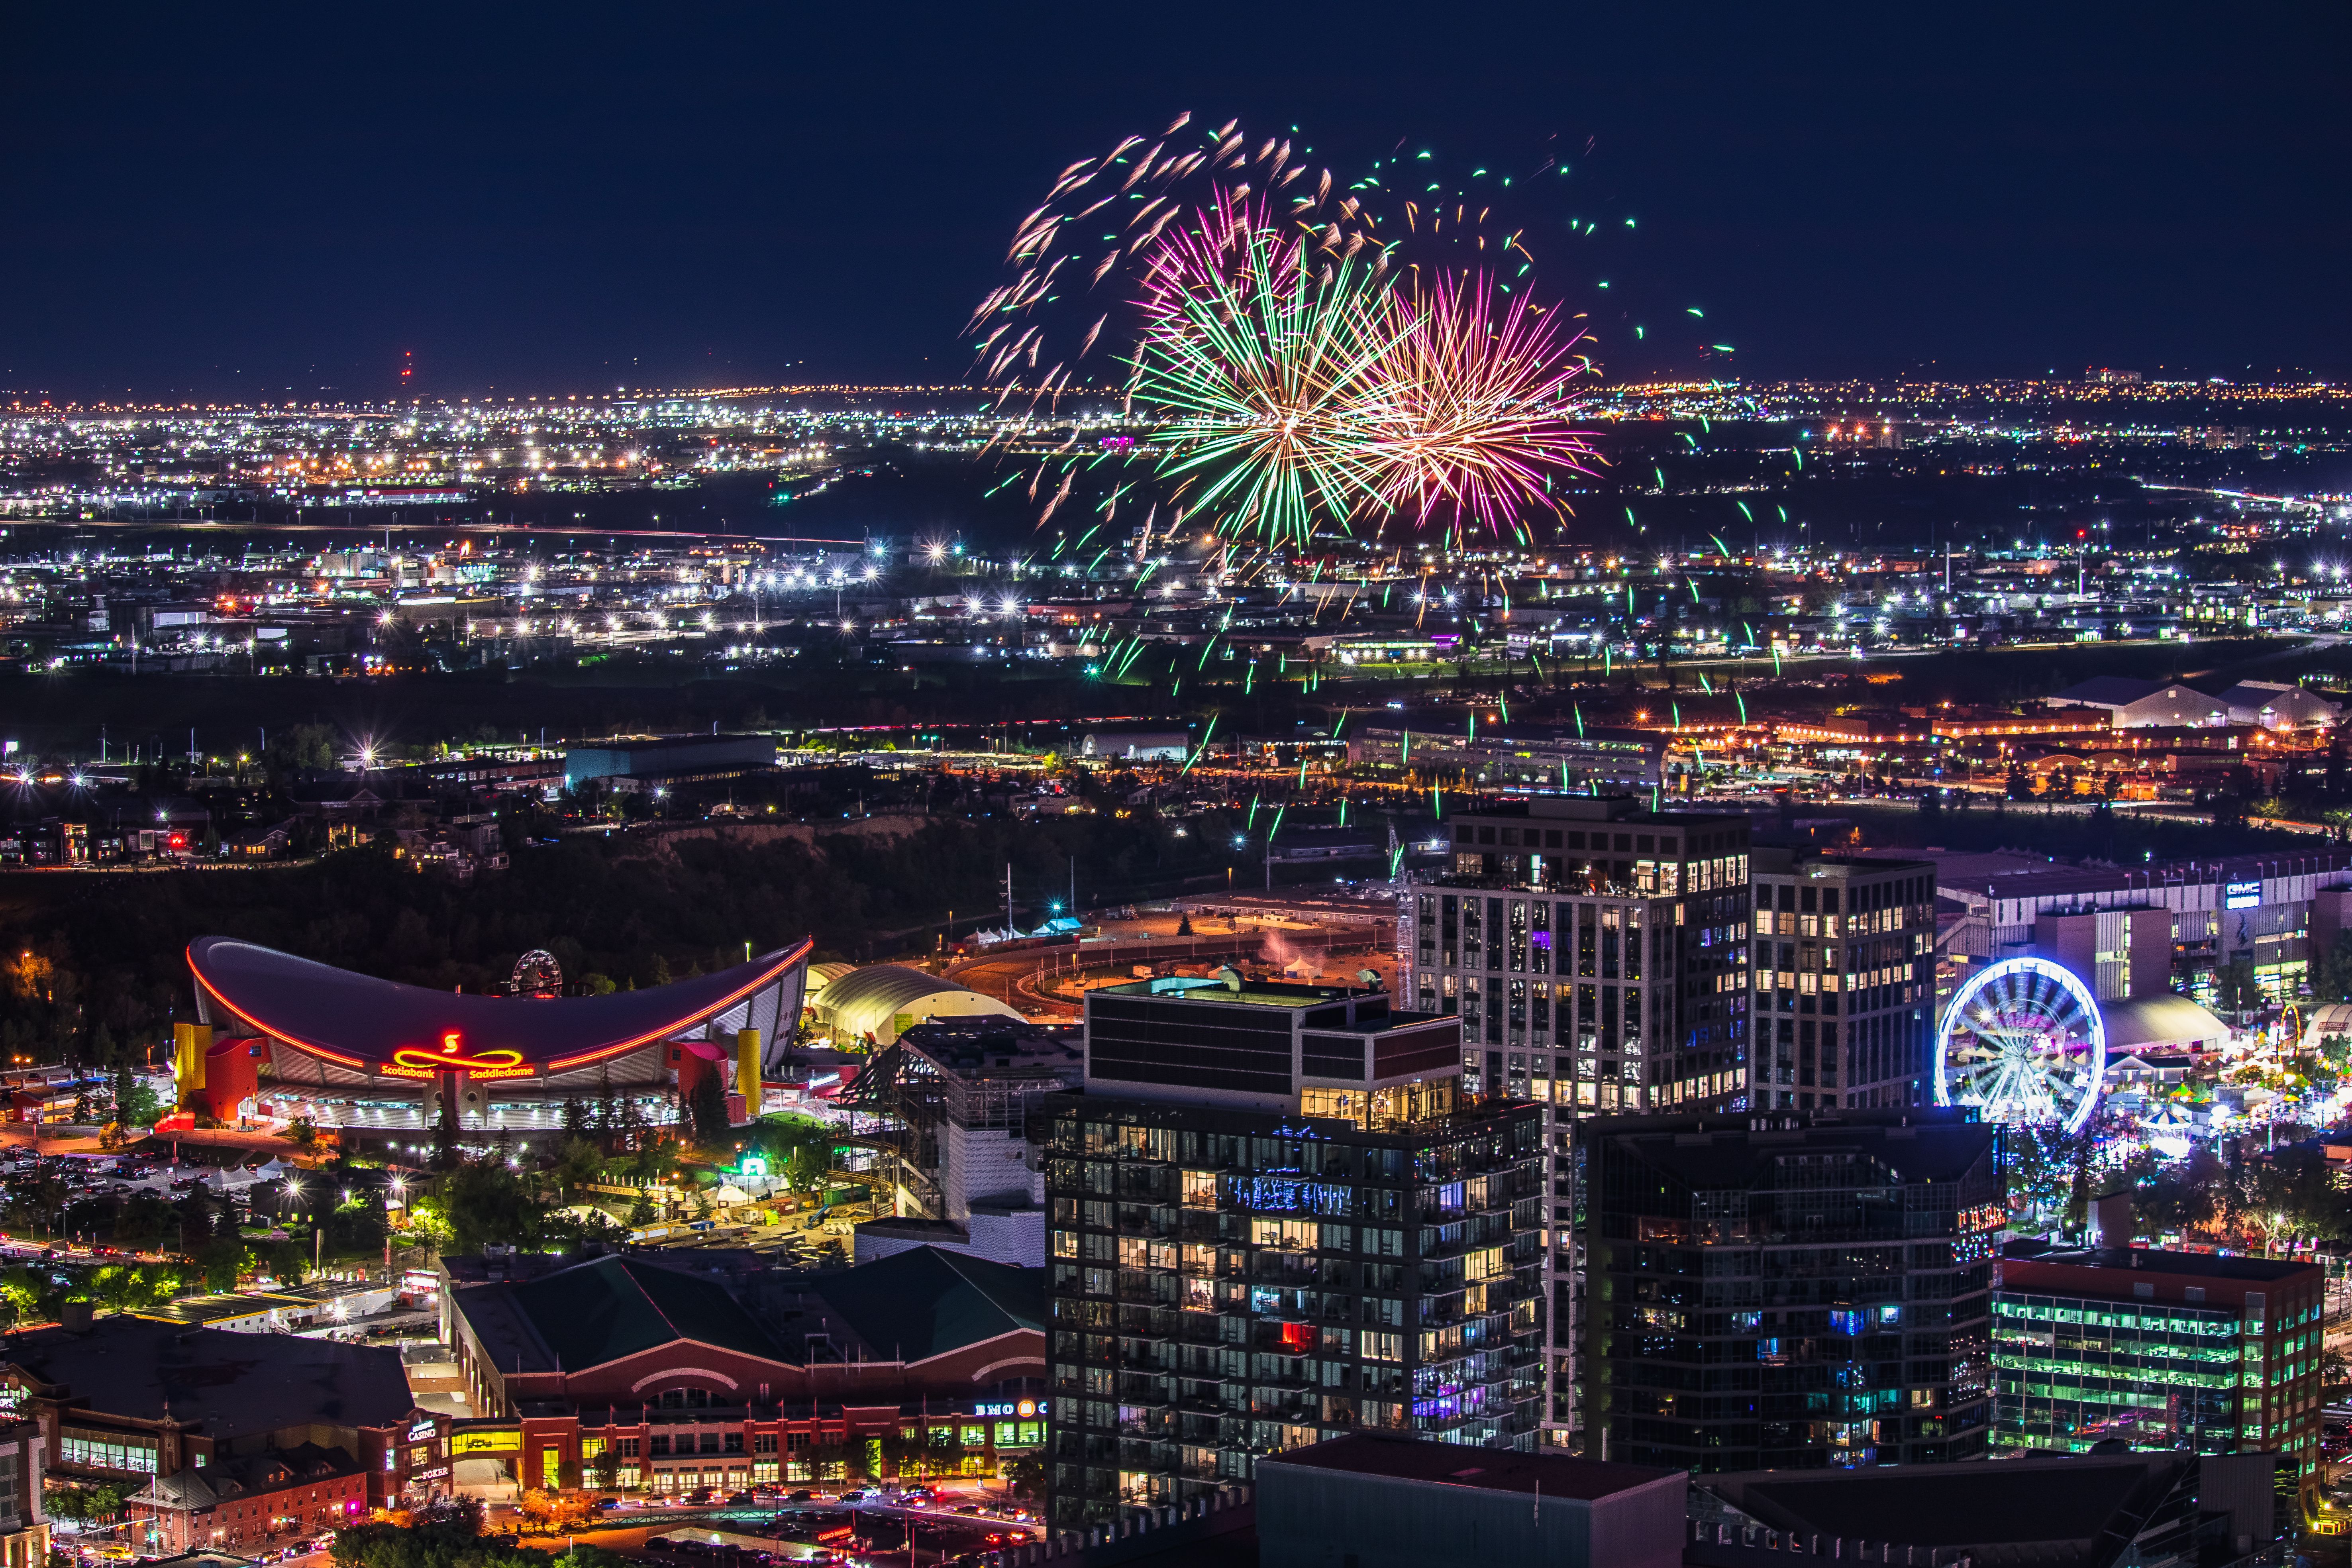 Colorful lights of the buildings and fireworks at night, Calgary, Alberta